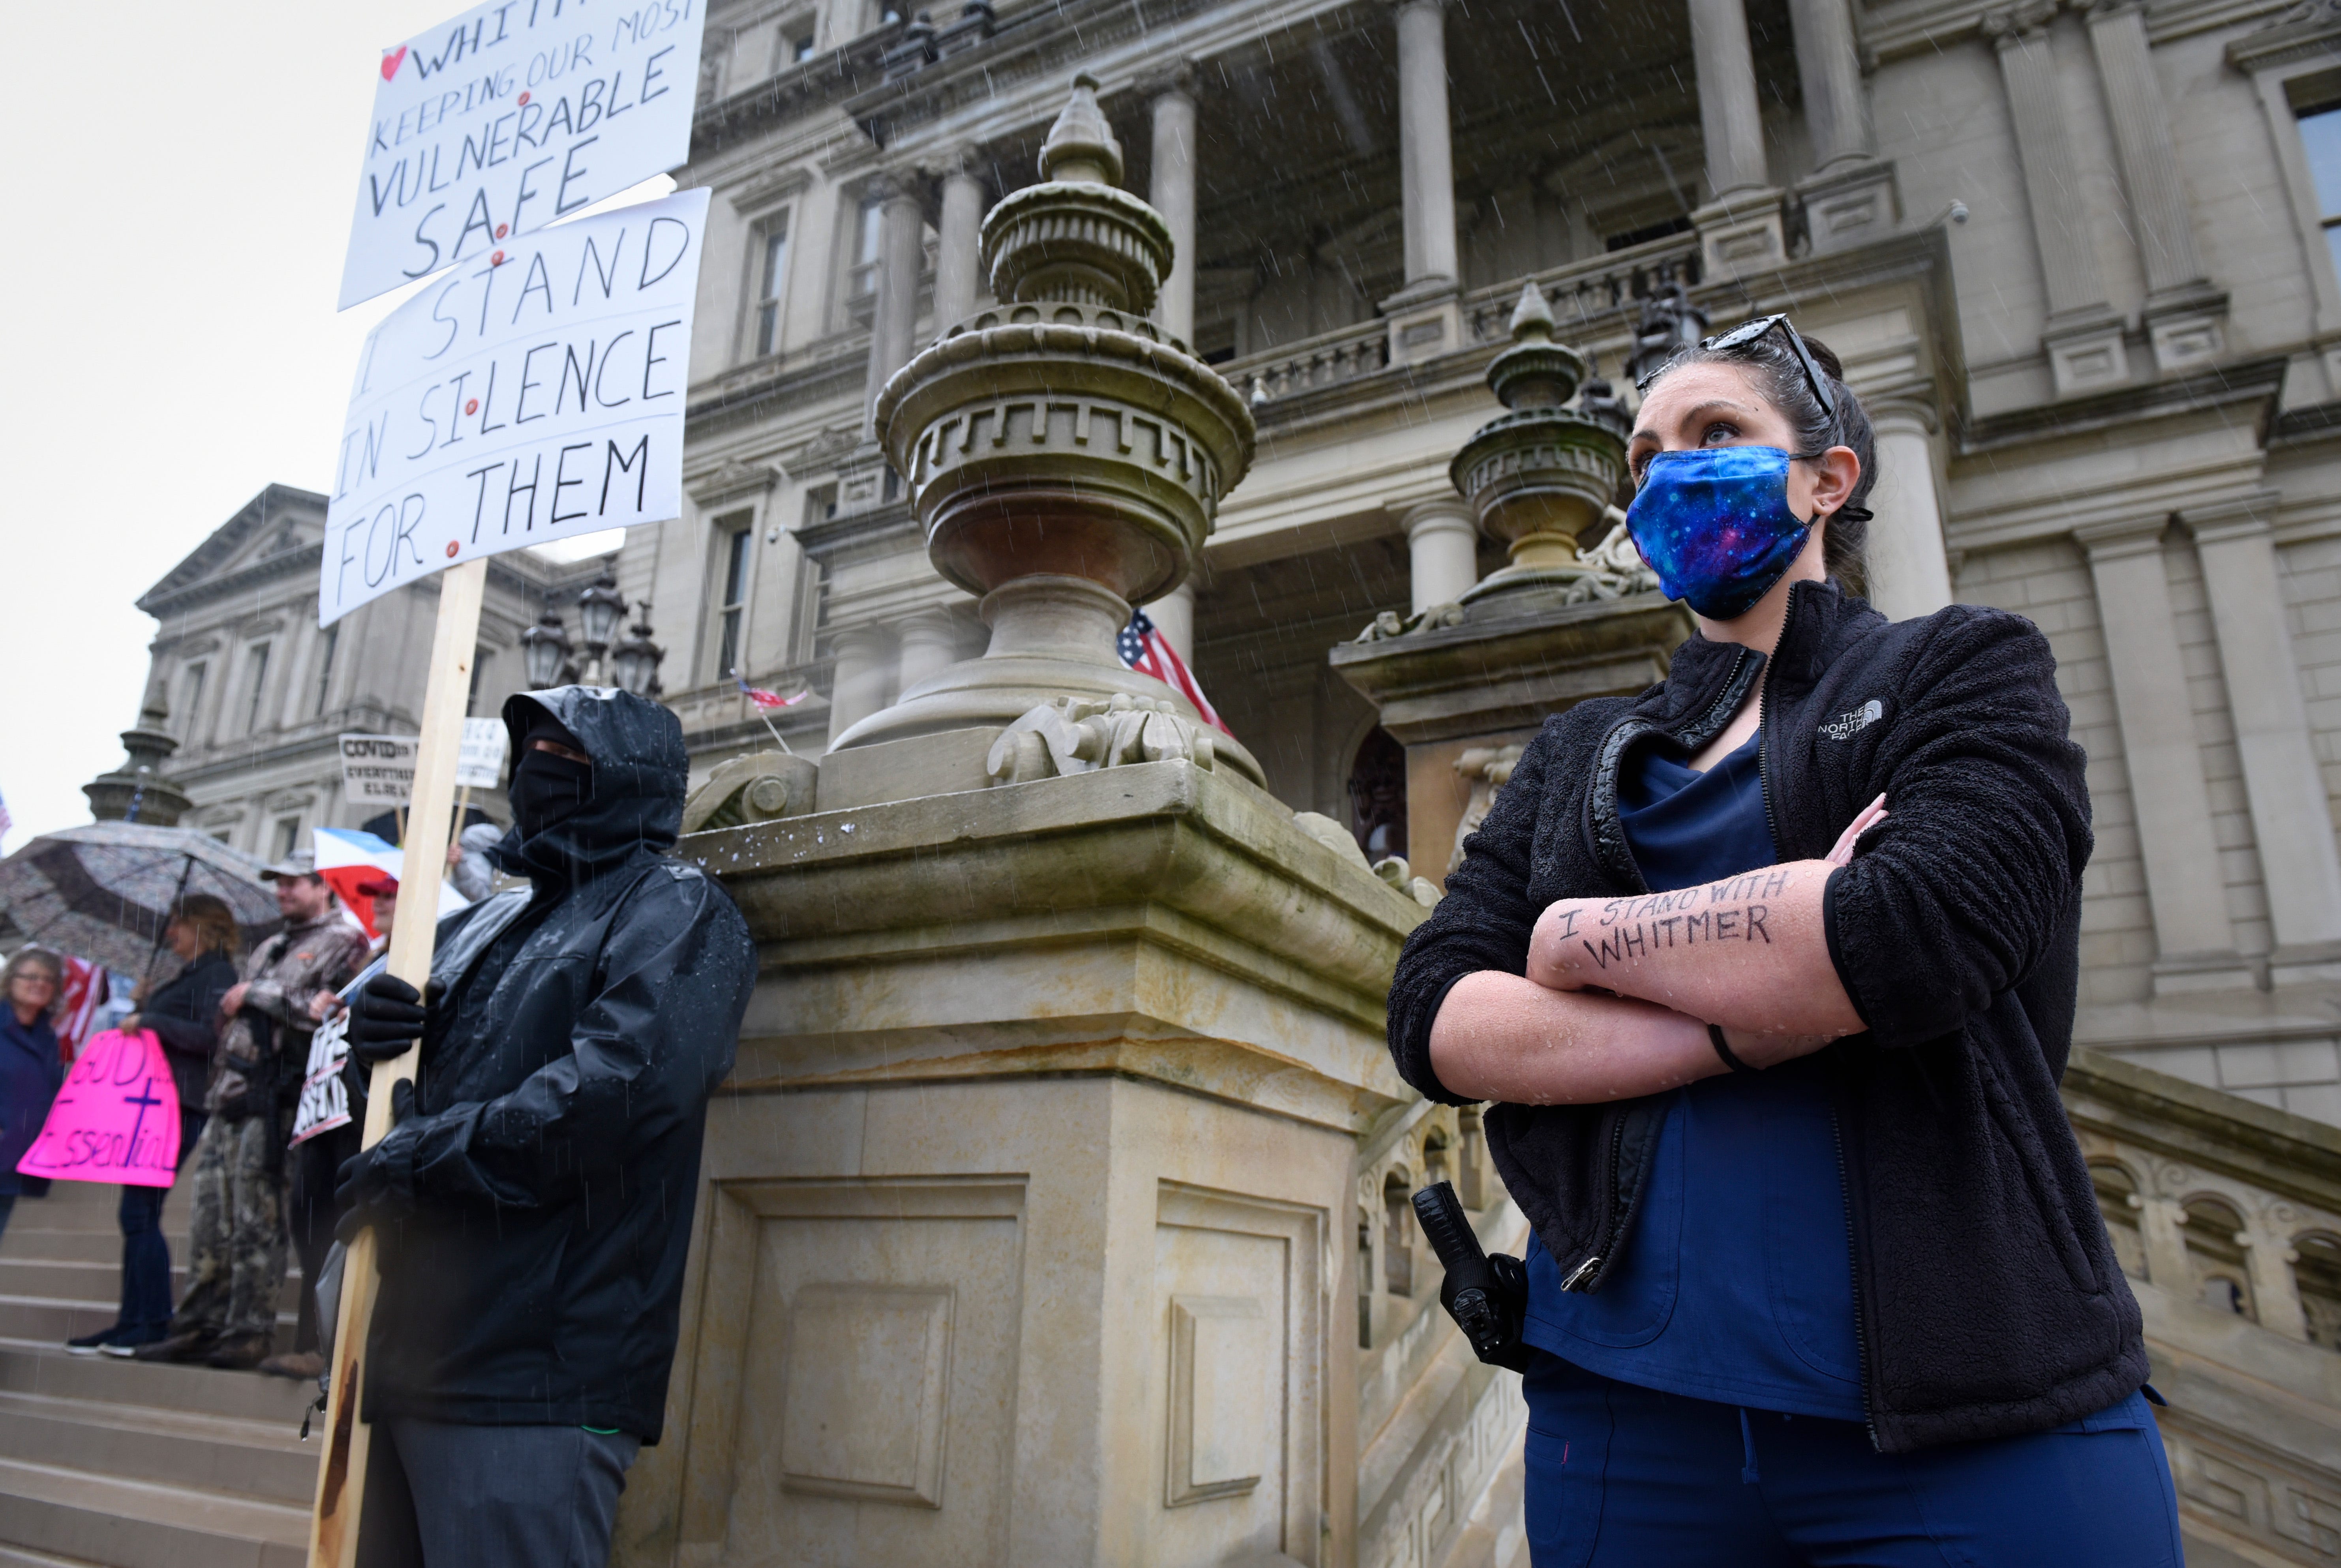 Counter protestors stands for Michigan Governor Gretchen Whitmer during a protest at the state Capitol to oppose her executive orders issued in response to the coronavirus pandemic.